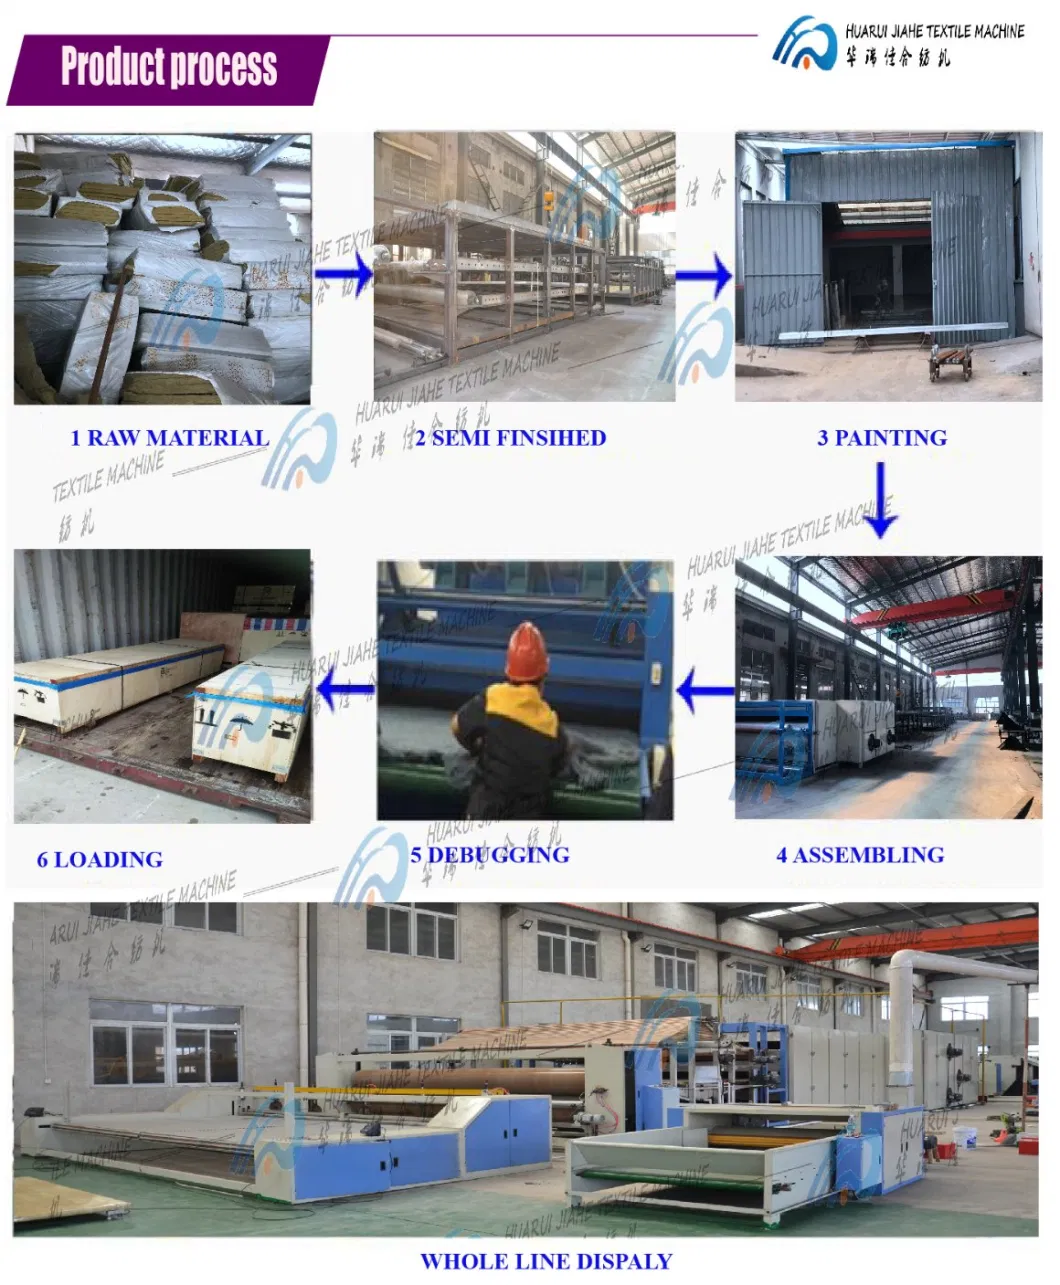 Count Grey Cotton Yarn Setting Machine in Cheese Dyeing Machine Production Line Increase Yarn Moisture by 1.5-3%